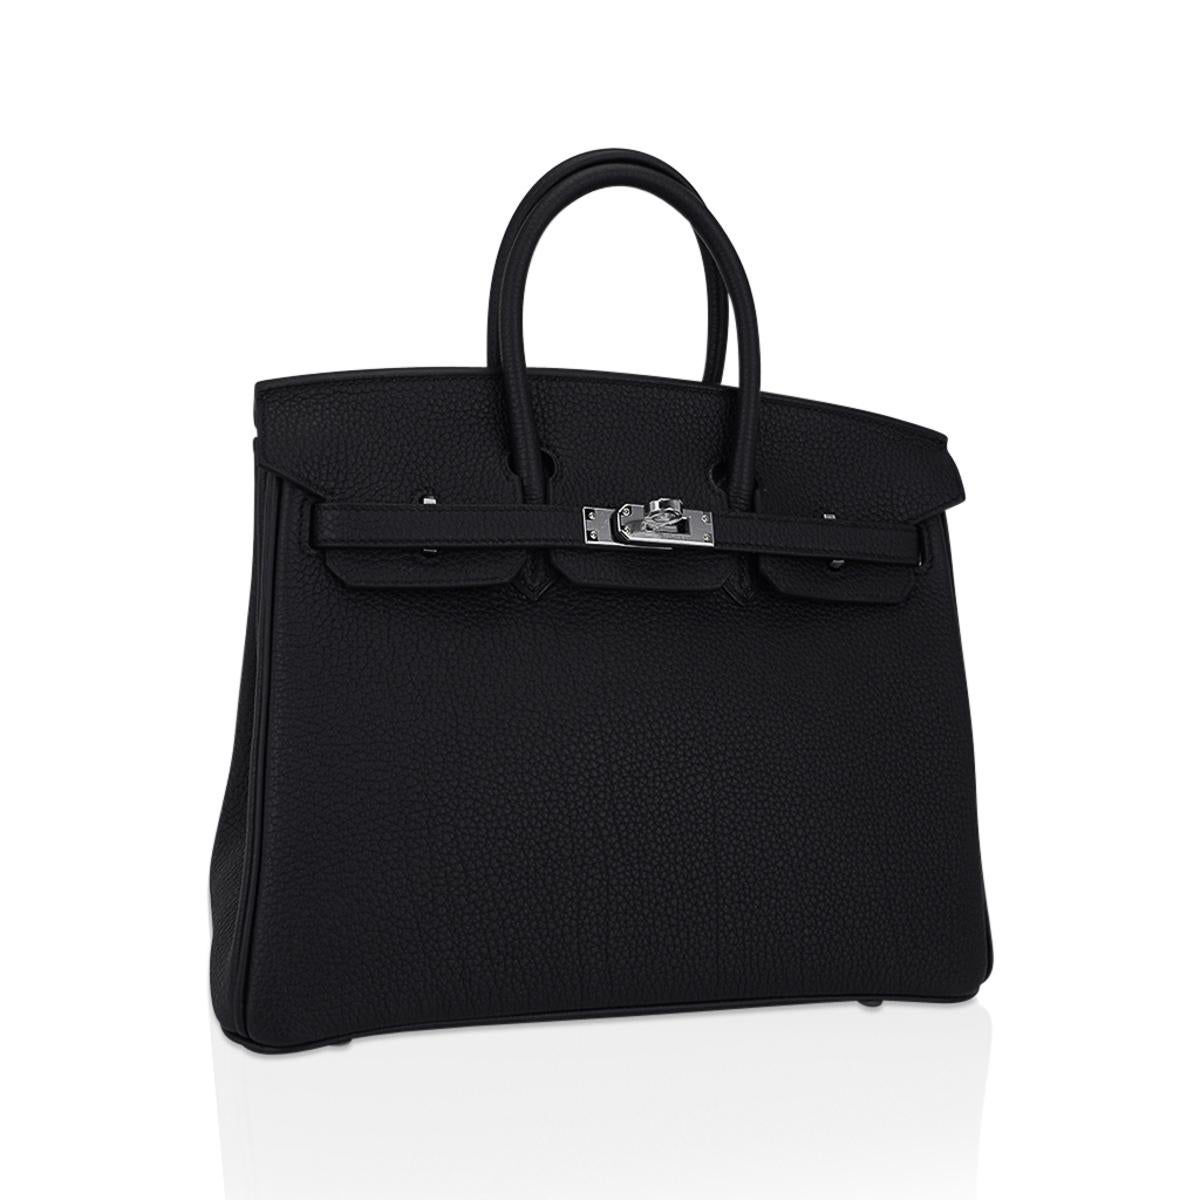 Mightychic offers an Hermes Birkin 25 bag featured in Black.
This beautiful Birkin bag is crisp and fresh with Palladium hardware.
Lush Togo leather is supple and scratch resistant.
Comes with lock, keys, clochette, sleepers, raincoat and signature